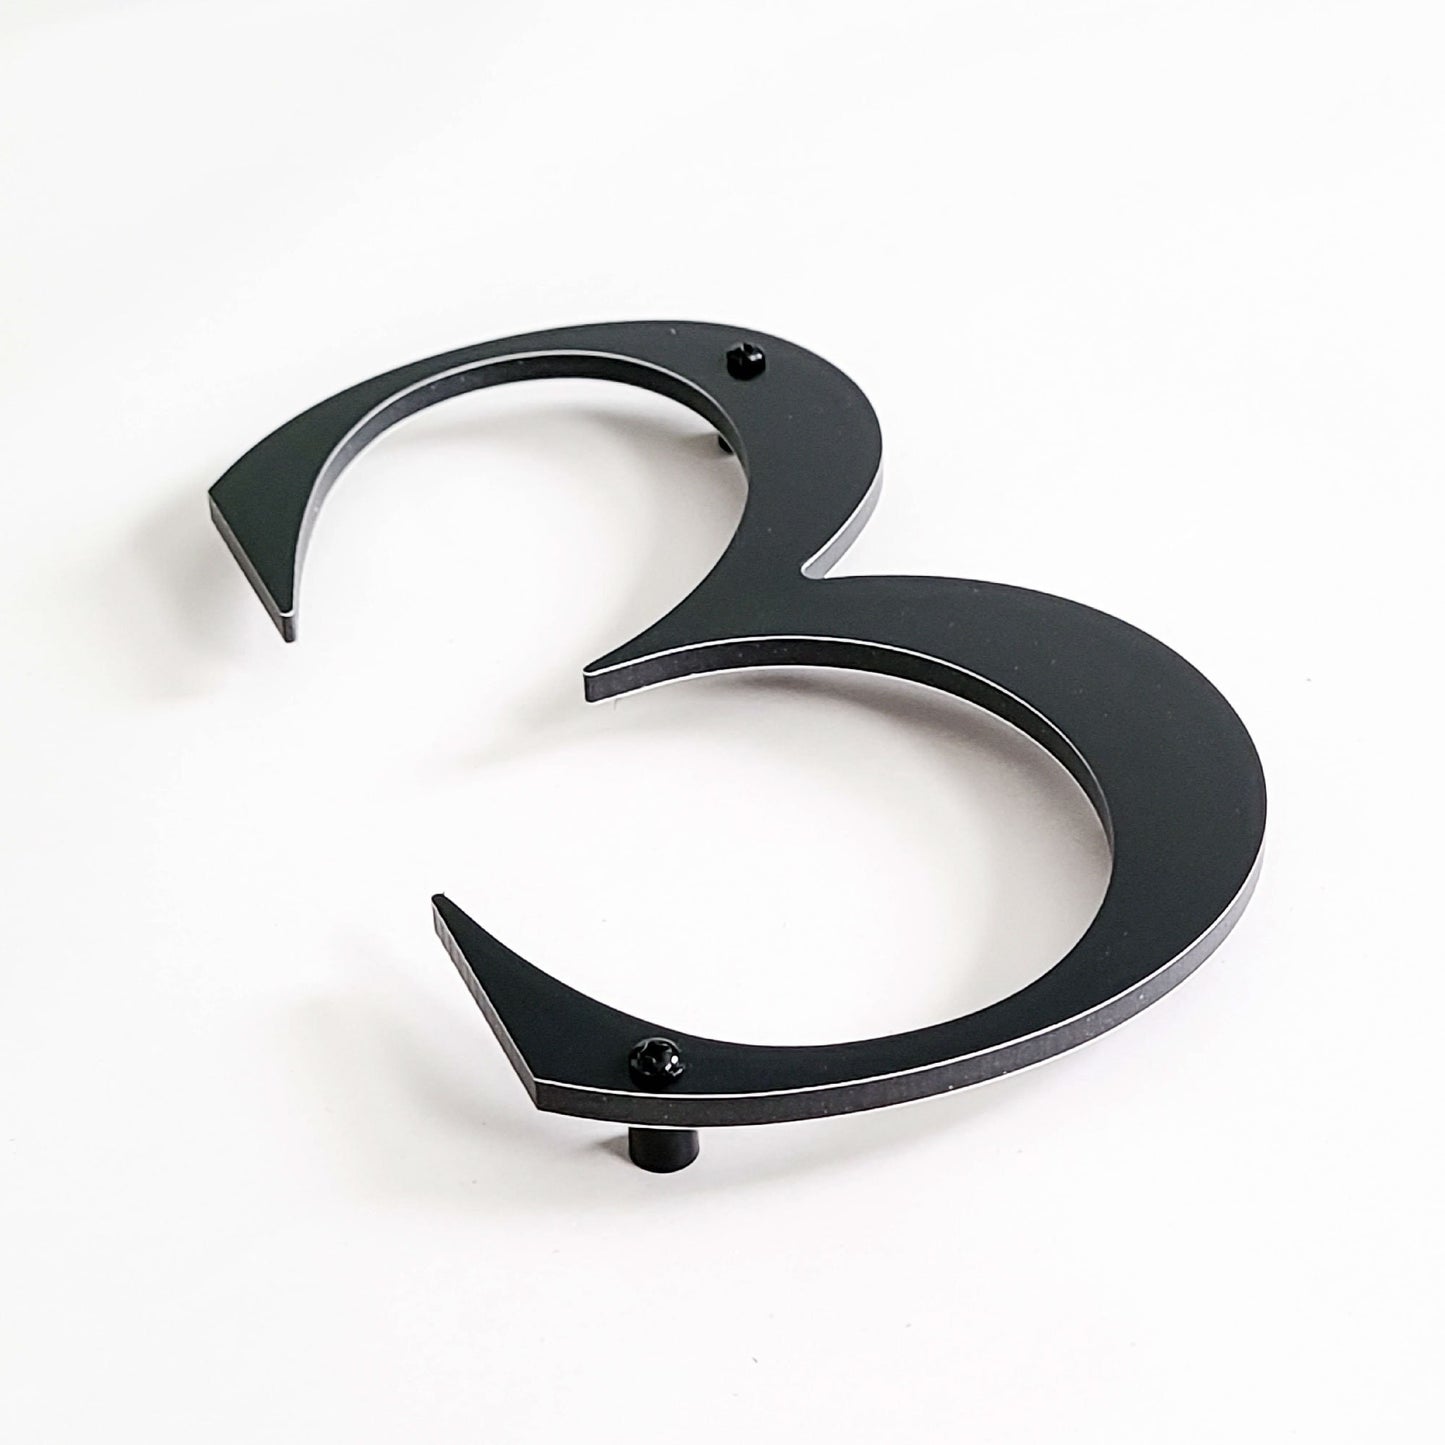 ROMAN SERIF house numbers showing standoffs and spacers for floating look